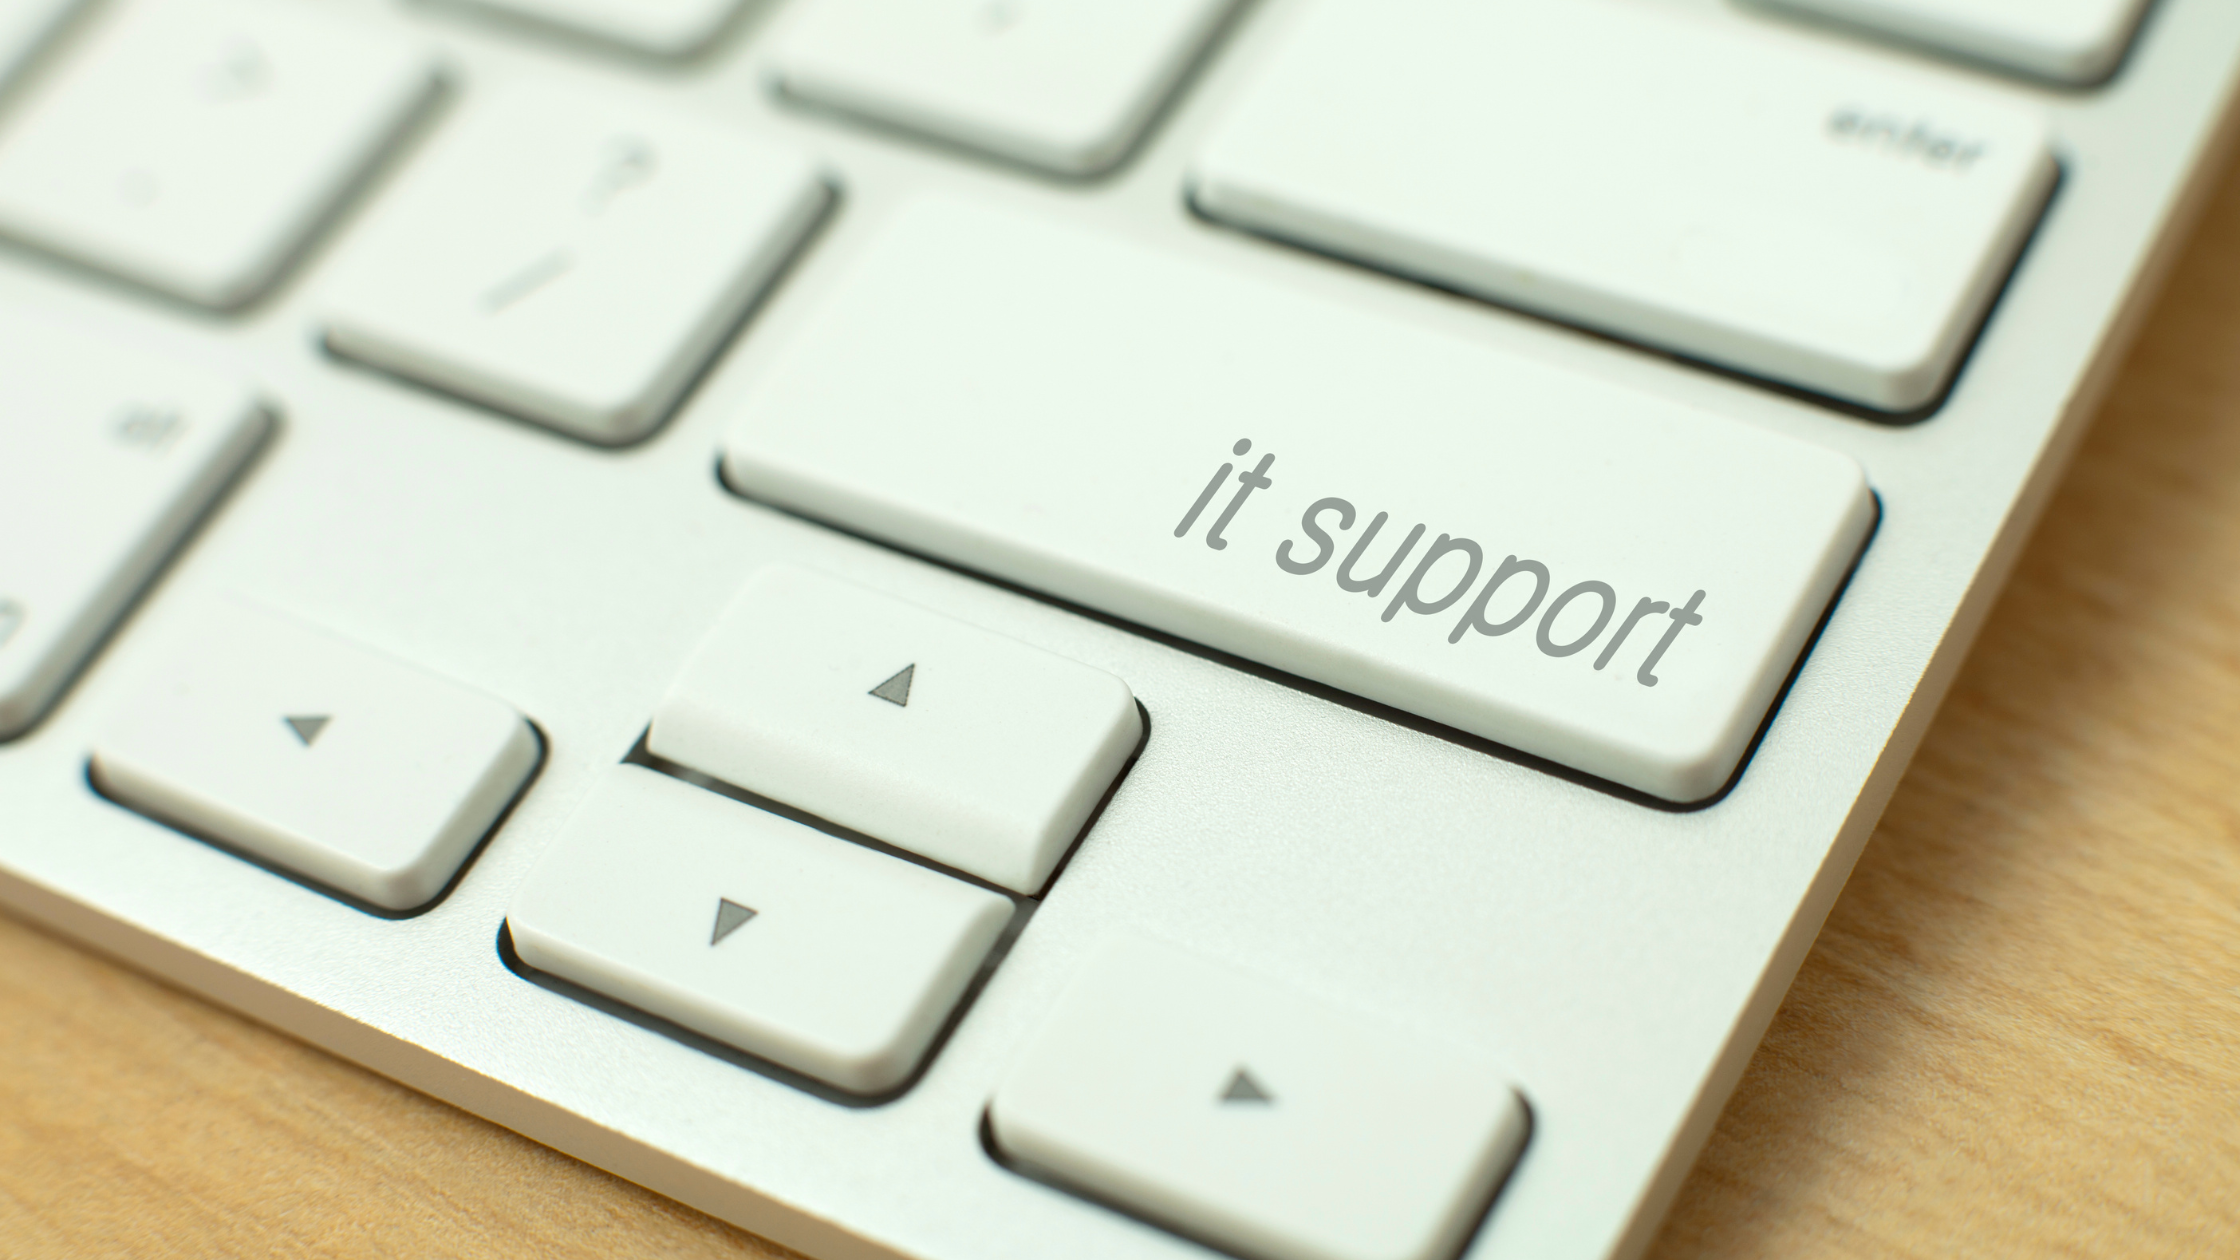 Keyboard with IT support written on the enter or return key.